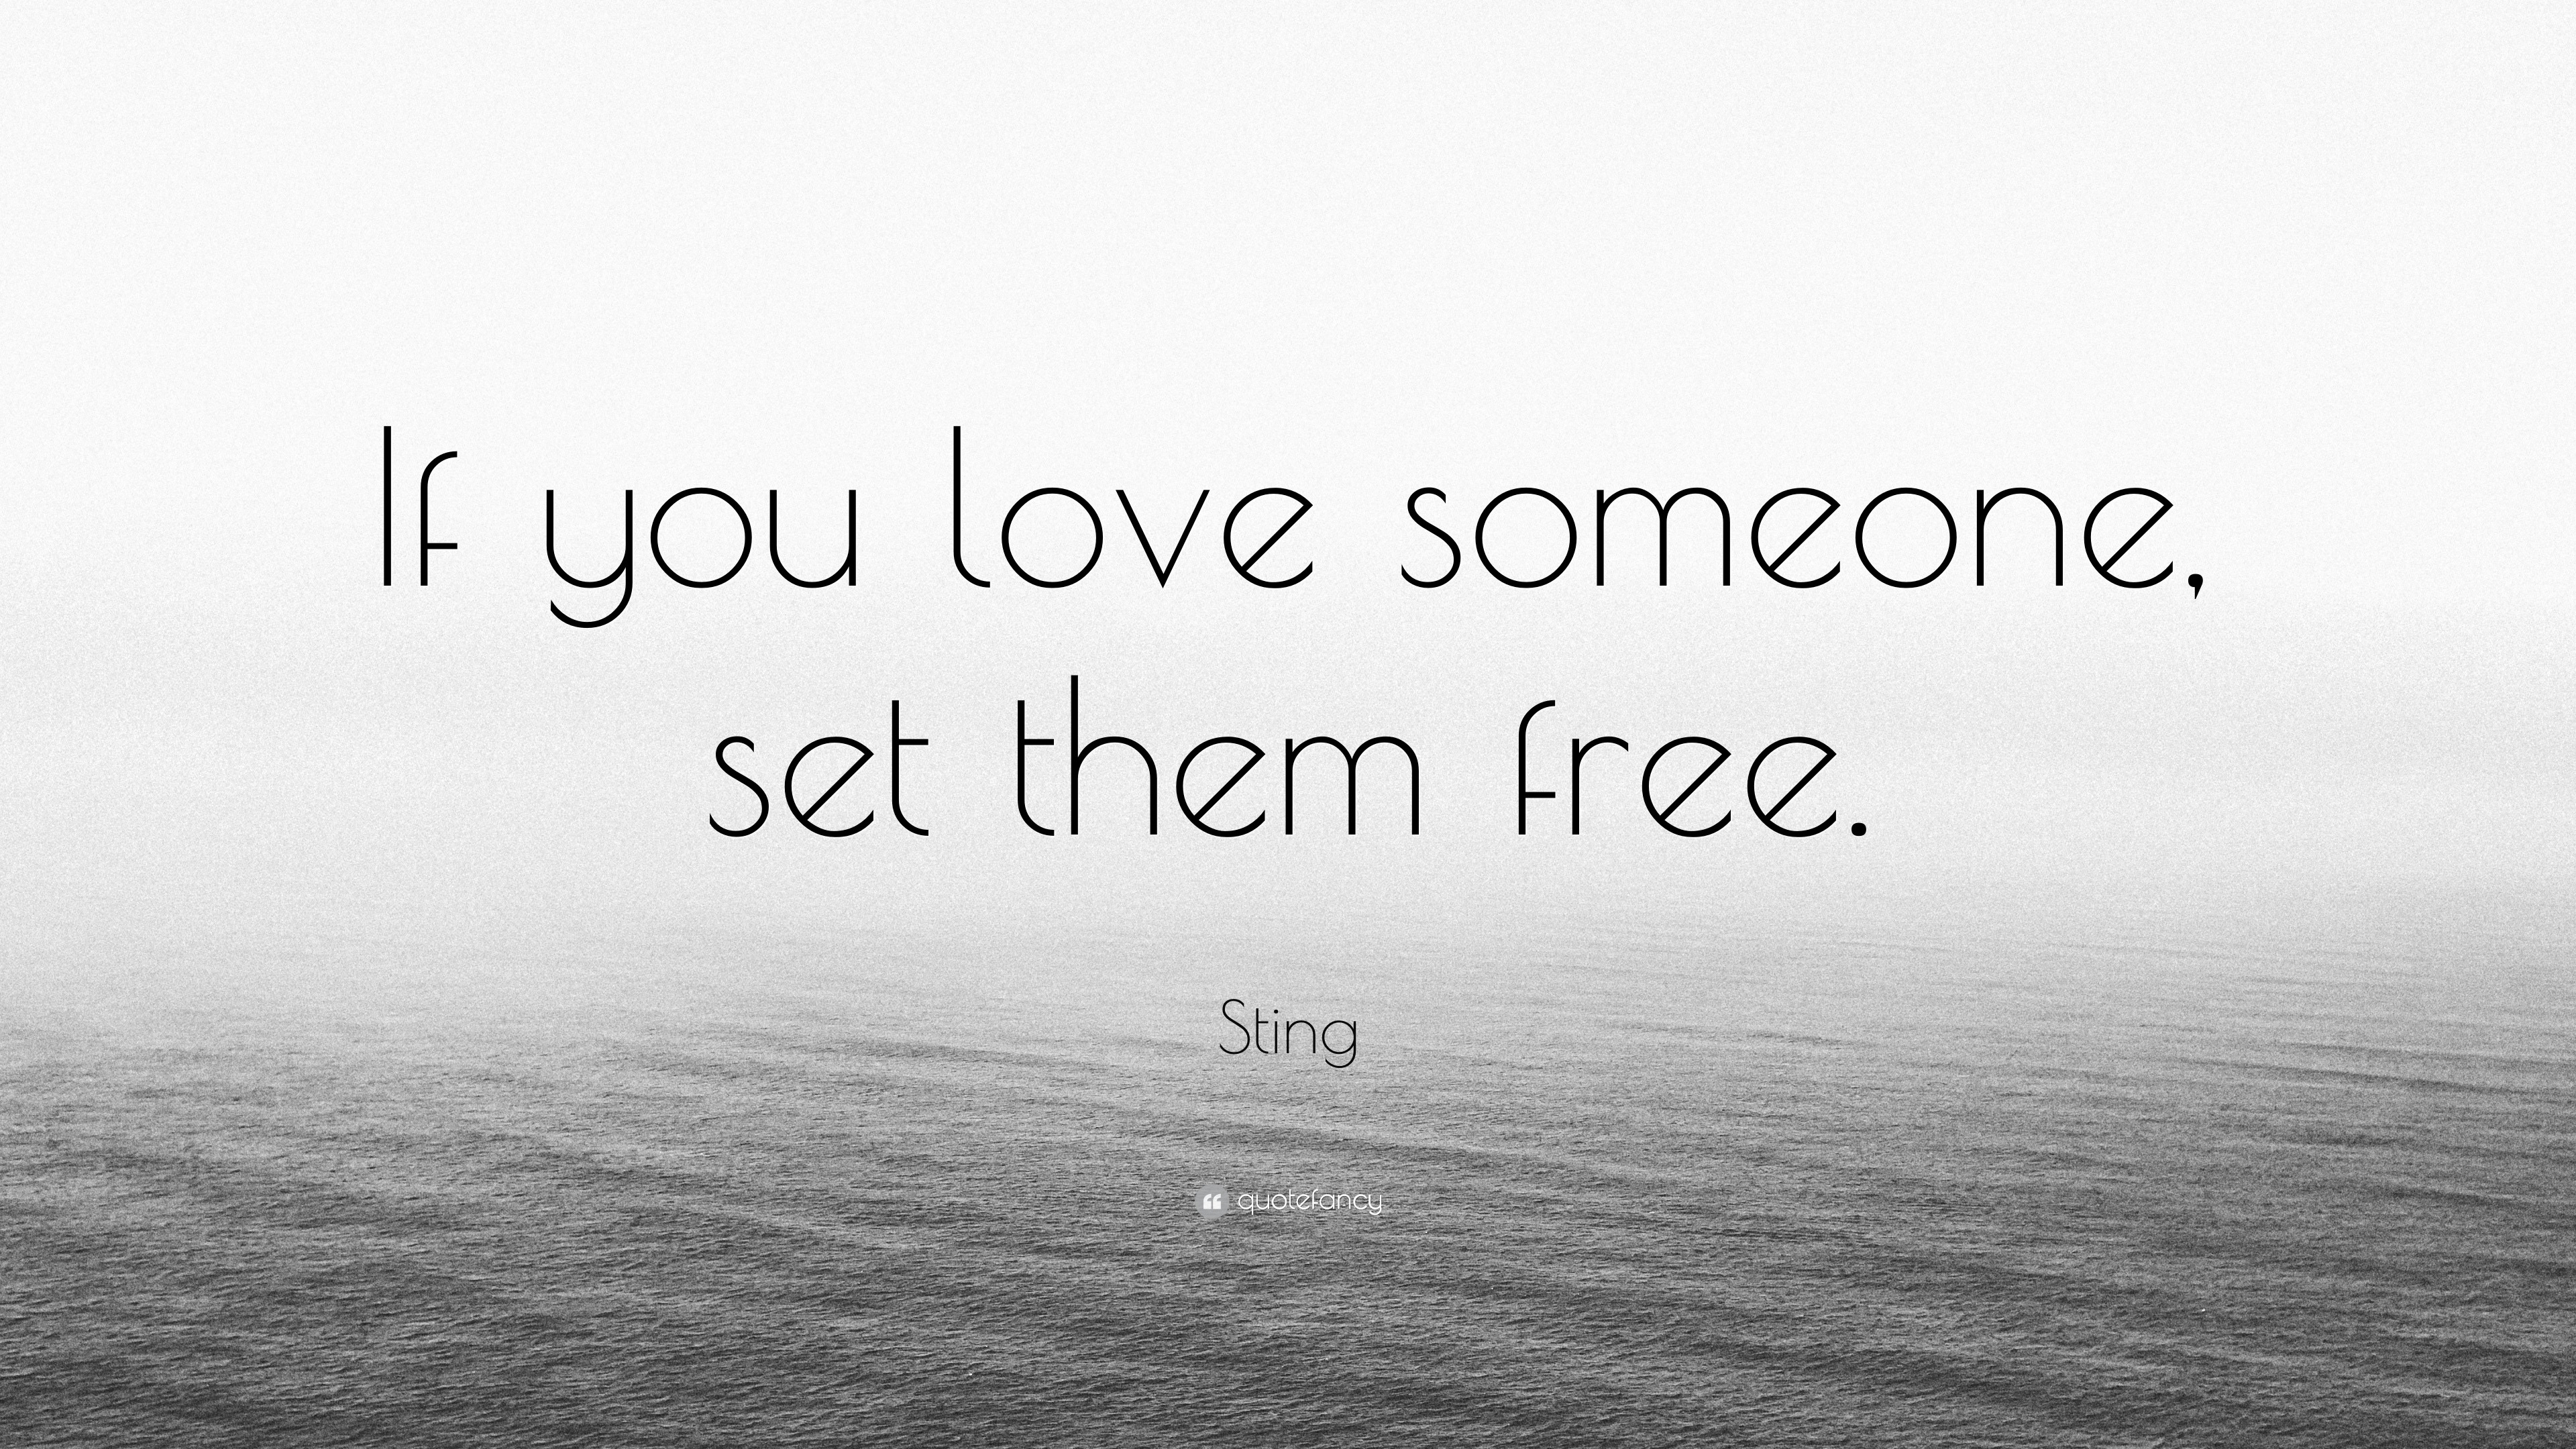 How to complete the If You Love Someone, Set Them Free With a